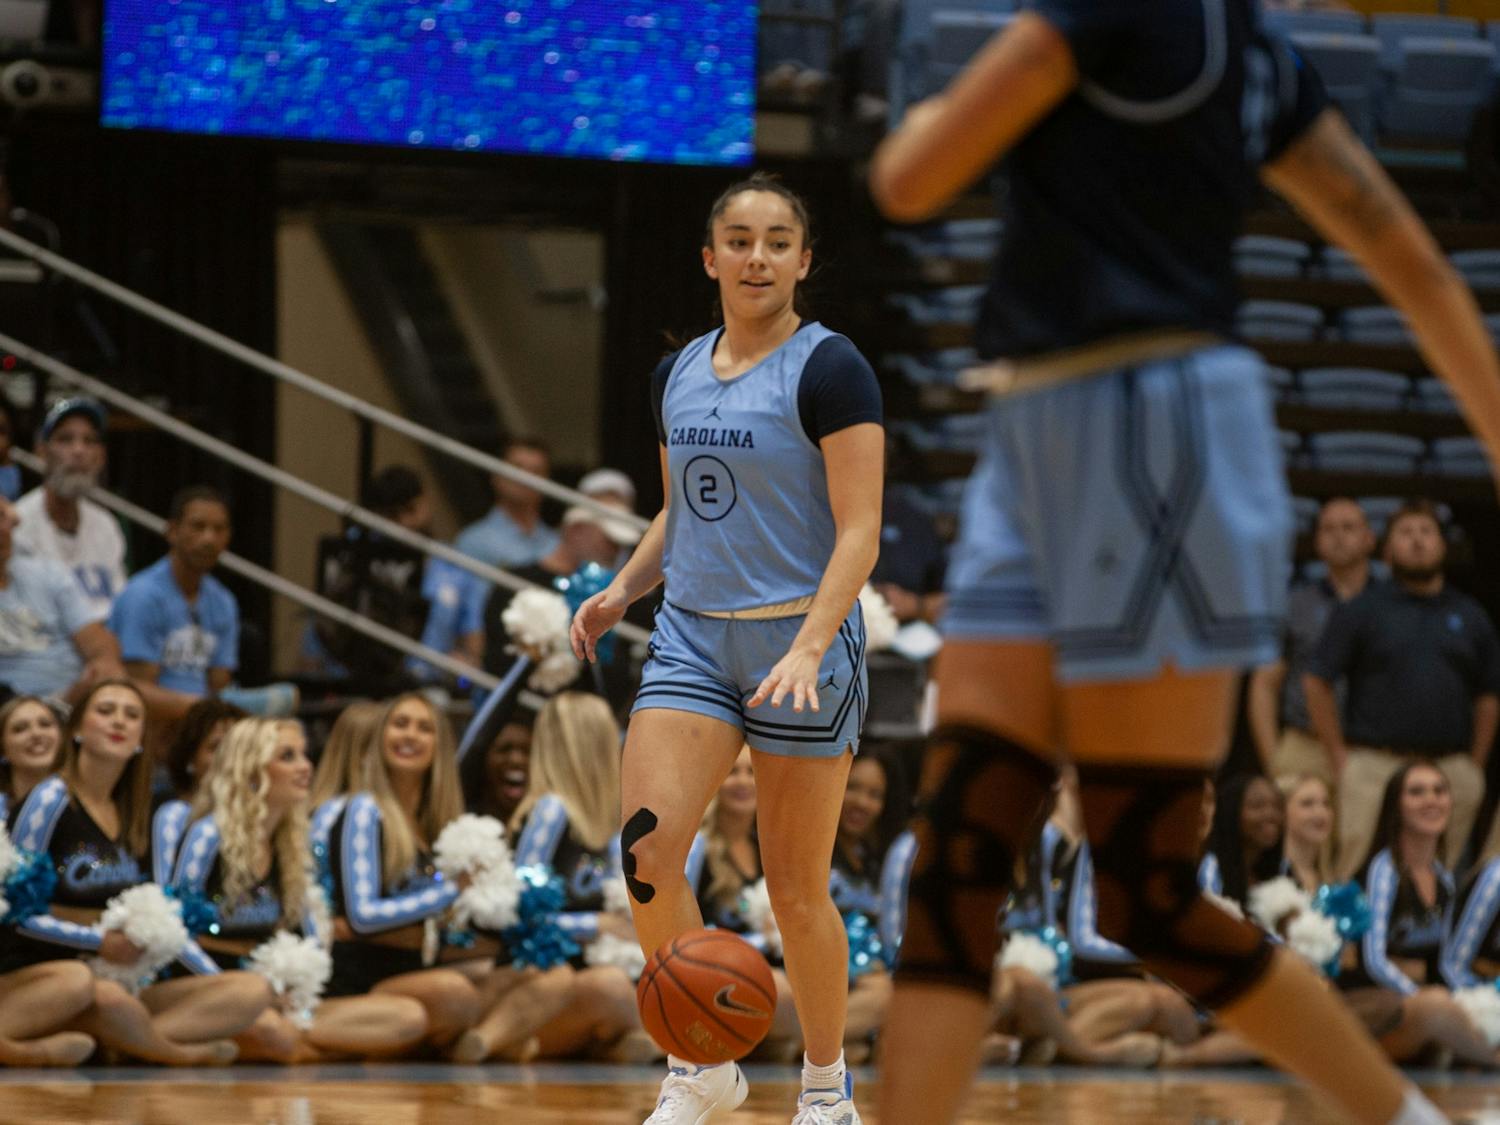 UNC freshman guard, Paulina Paris(2), dribbles downcourt during scrimmage at the Live Action Carolina Basketball event on Friday, Oct. 7, 2022, at Dean E. Smith Center.